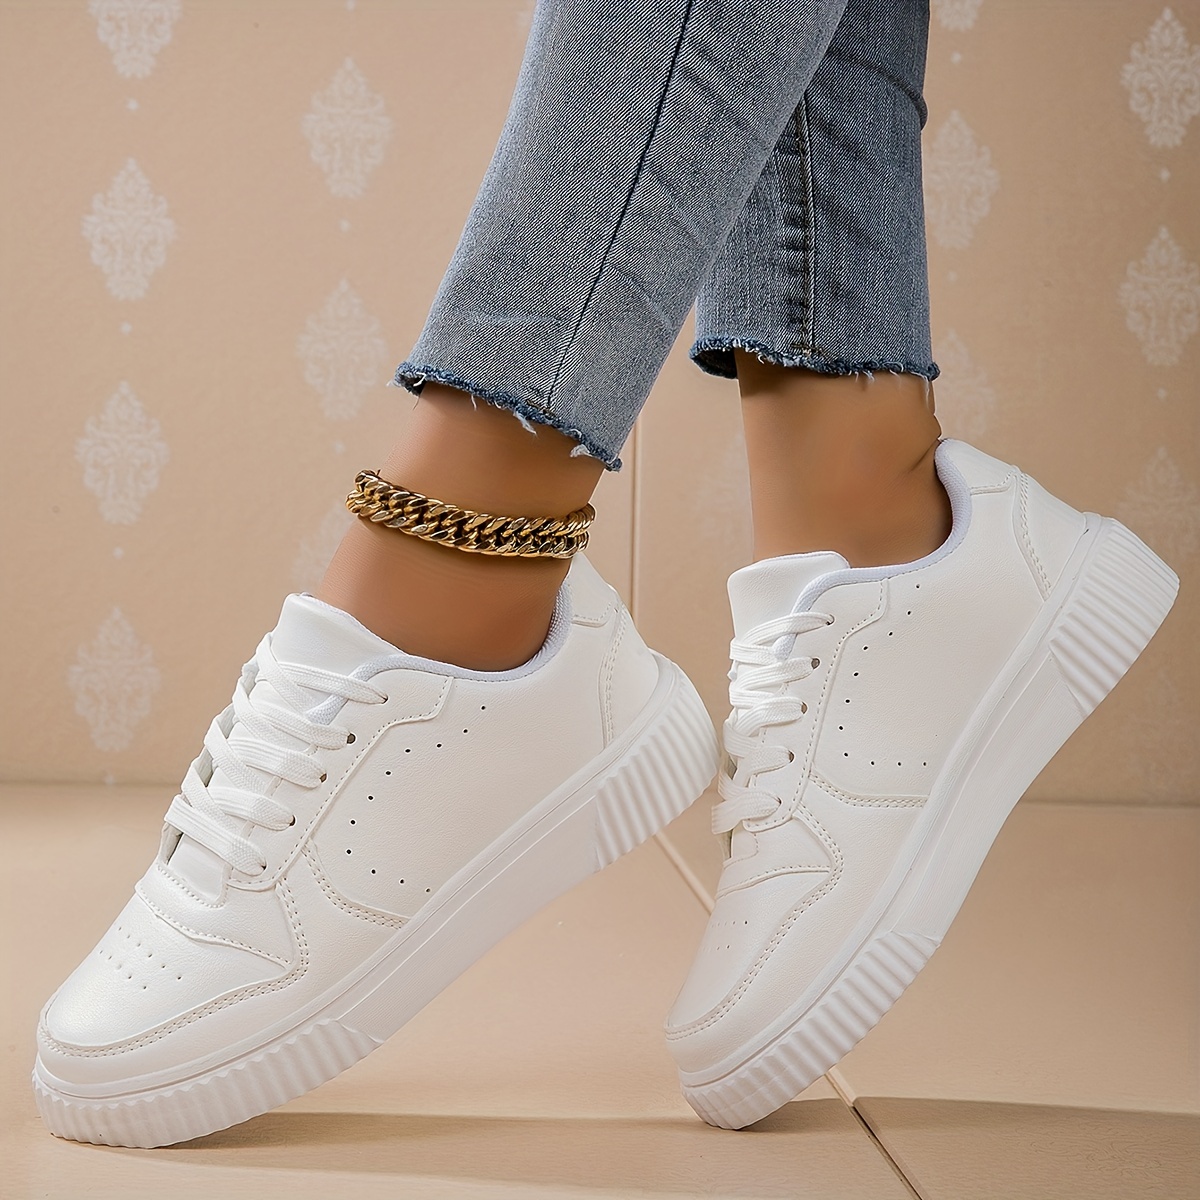 womens solid color sneakers casual lightweight low top skate shoes comfortable white lace up shoes details 3